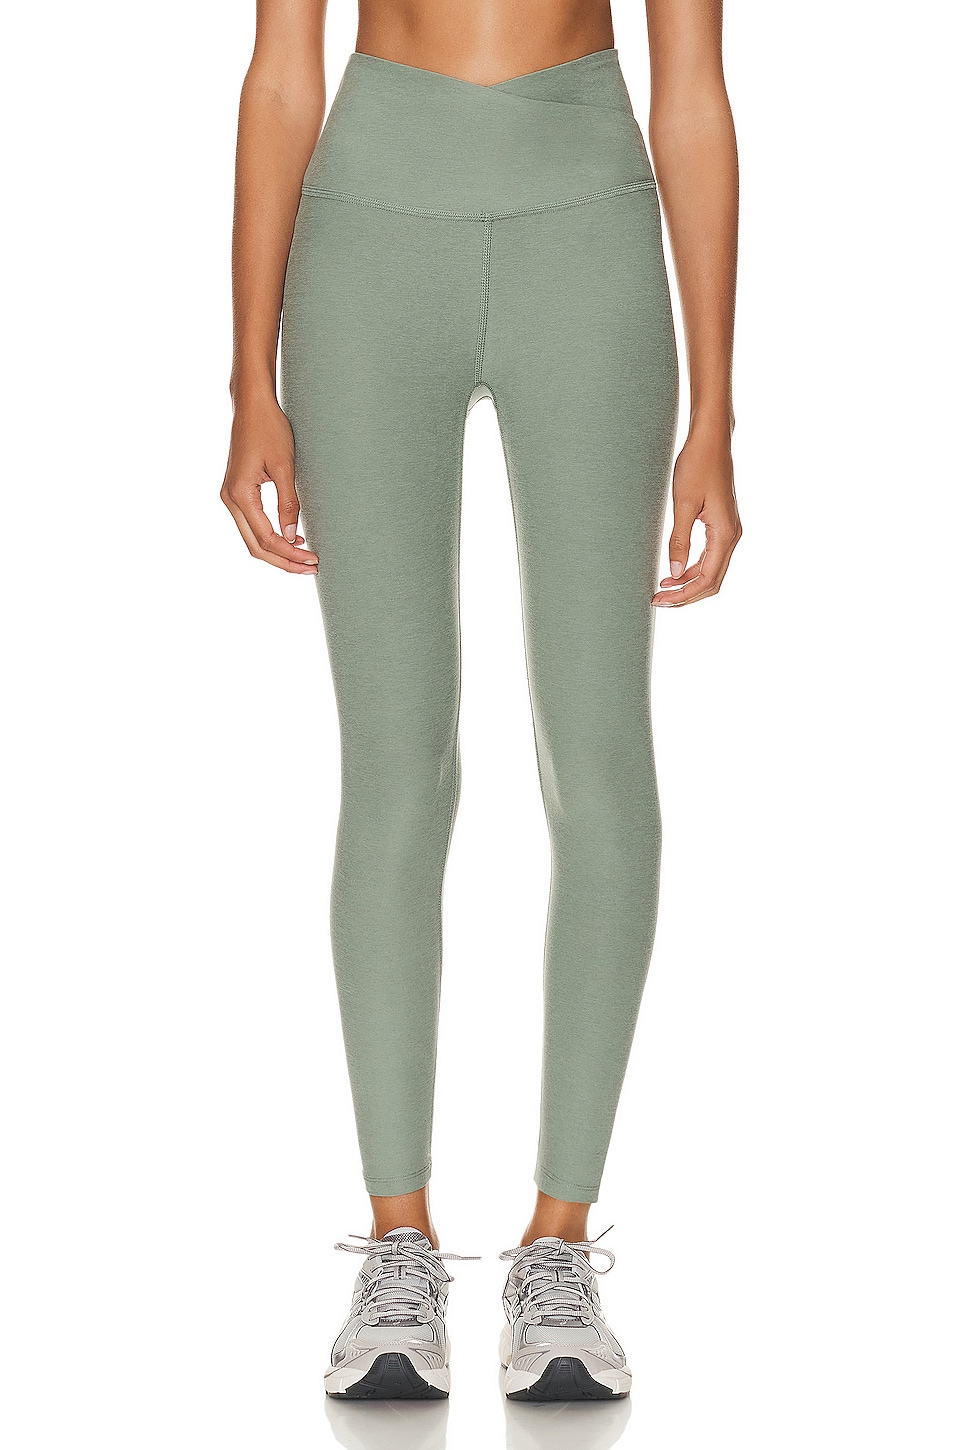 Image 1 of Beyond Yoga Spacedye At Your Leisure High Waisted Midi Legging in Grey Sage Heather